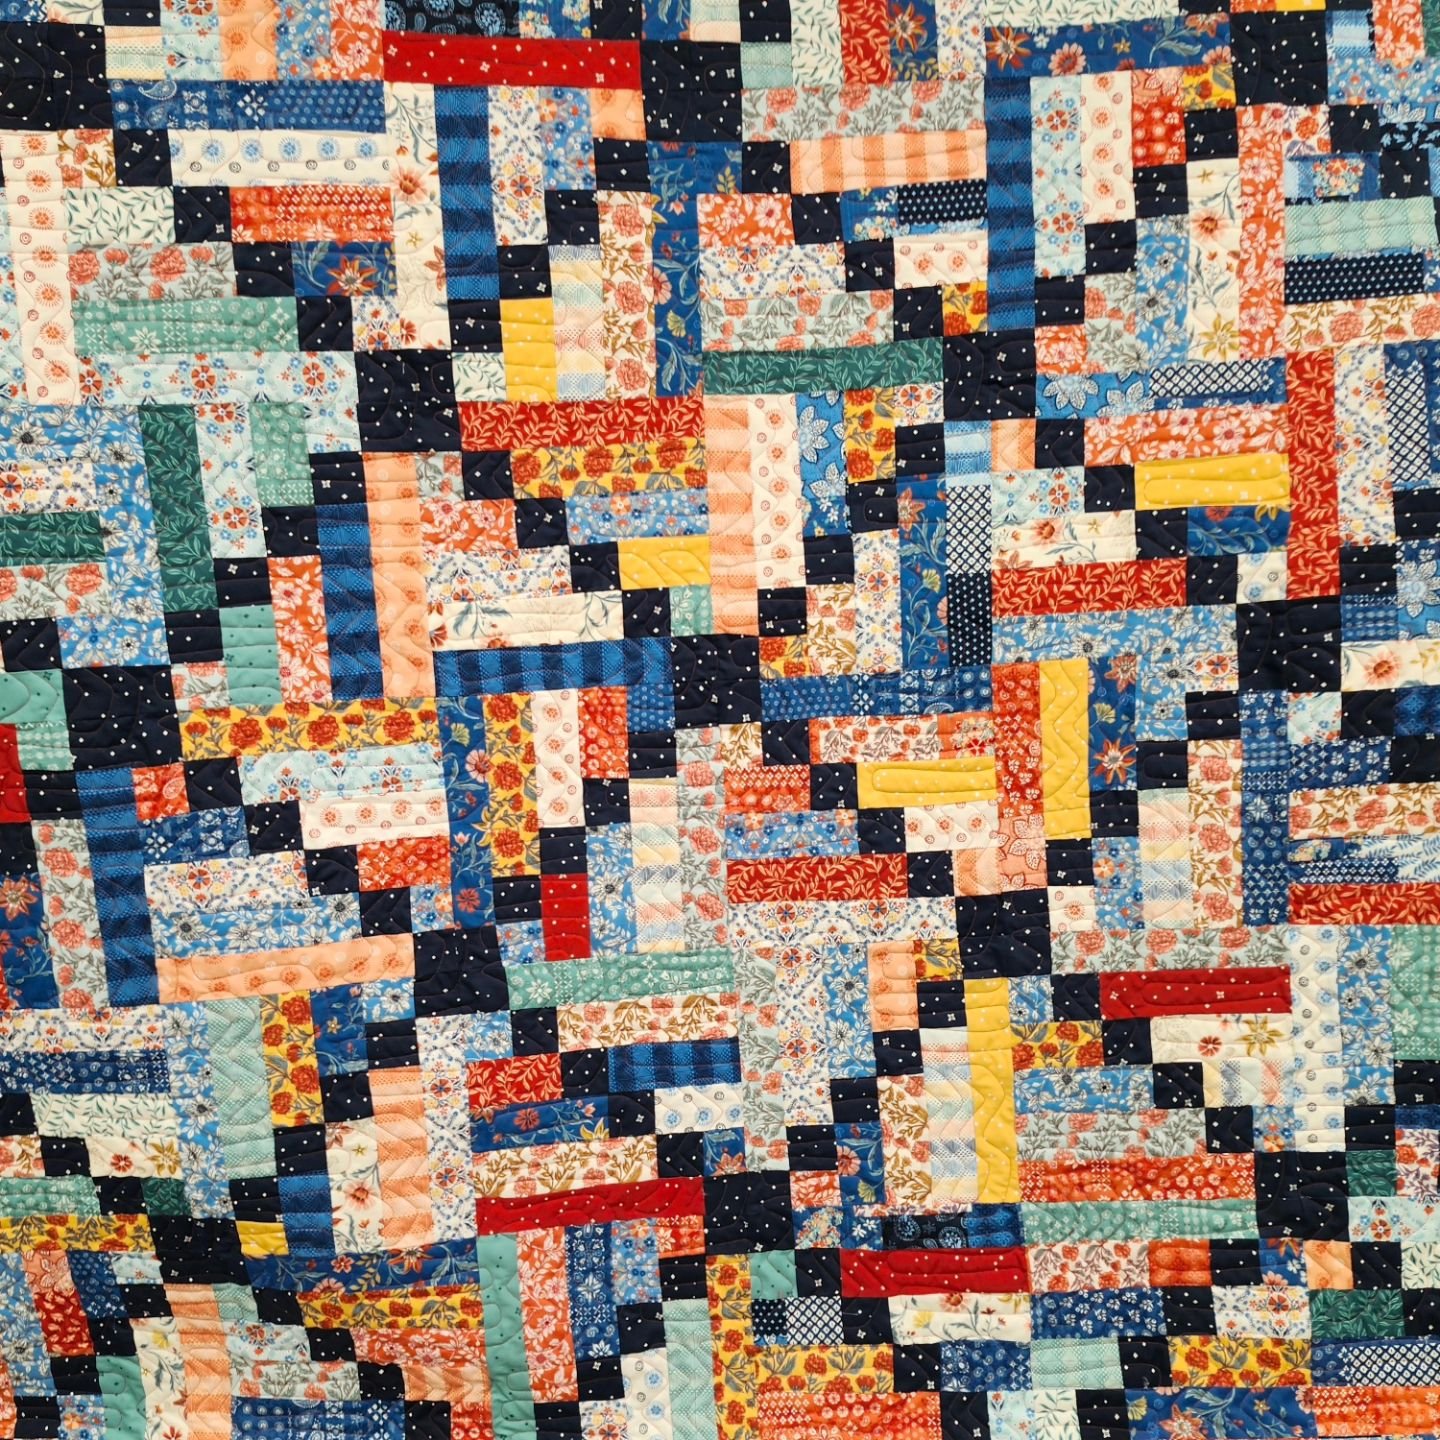 Phyllis was also in today to longarm her very colorful sticks &amp; stones quilt.  She chose a pattern called 'African Storm' #longarmmachinerentals #quiltfun #quiltyourselfawesome #quilting #gammillstatlerstitcher ##topstitchery